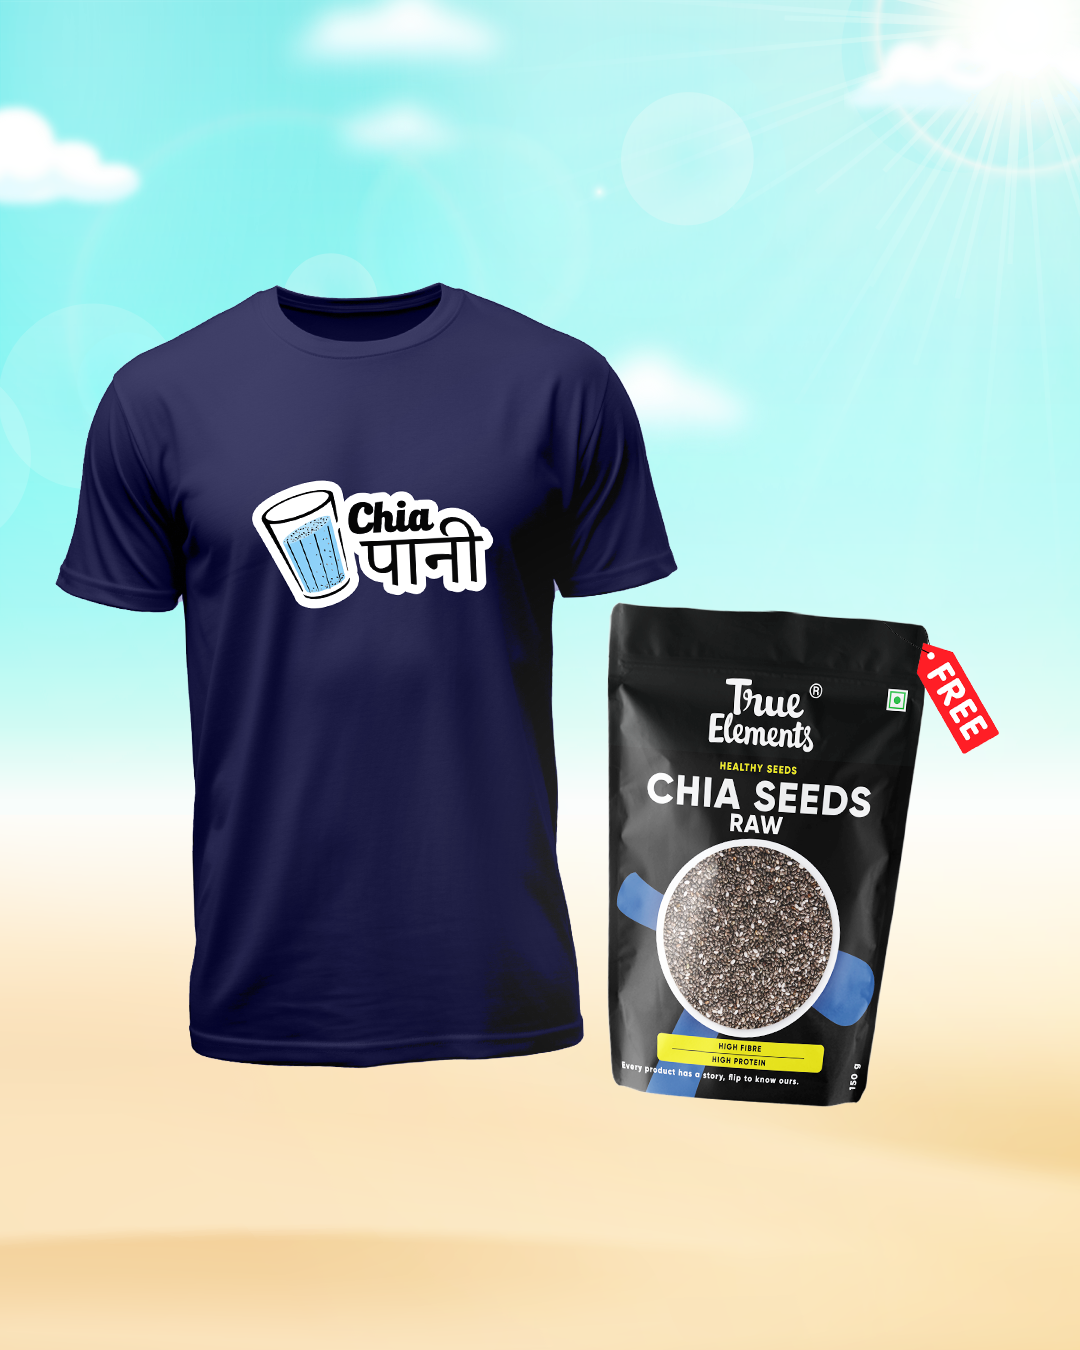 True Elements Official T-shirt + Free Chia Seeds worth Rs.199